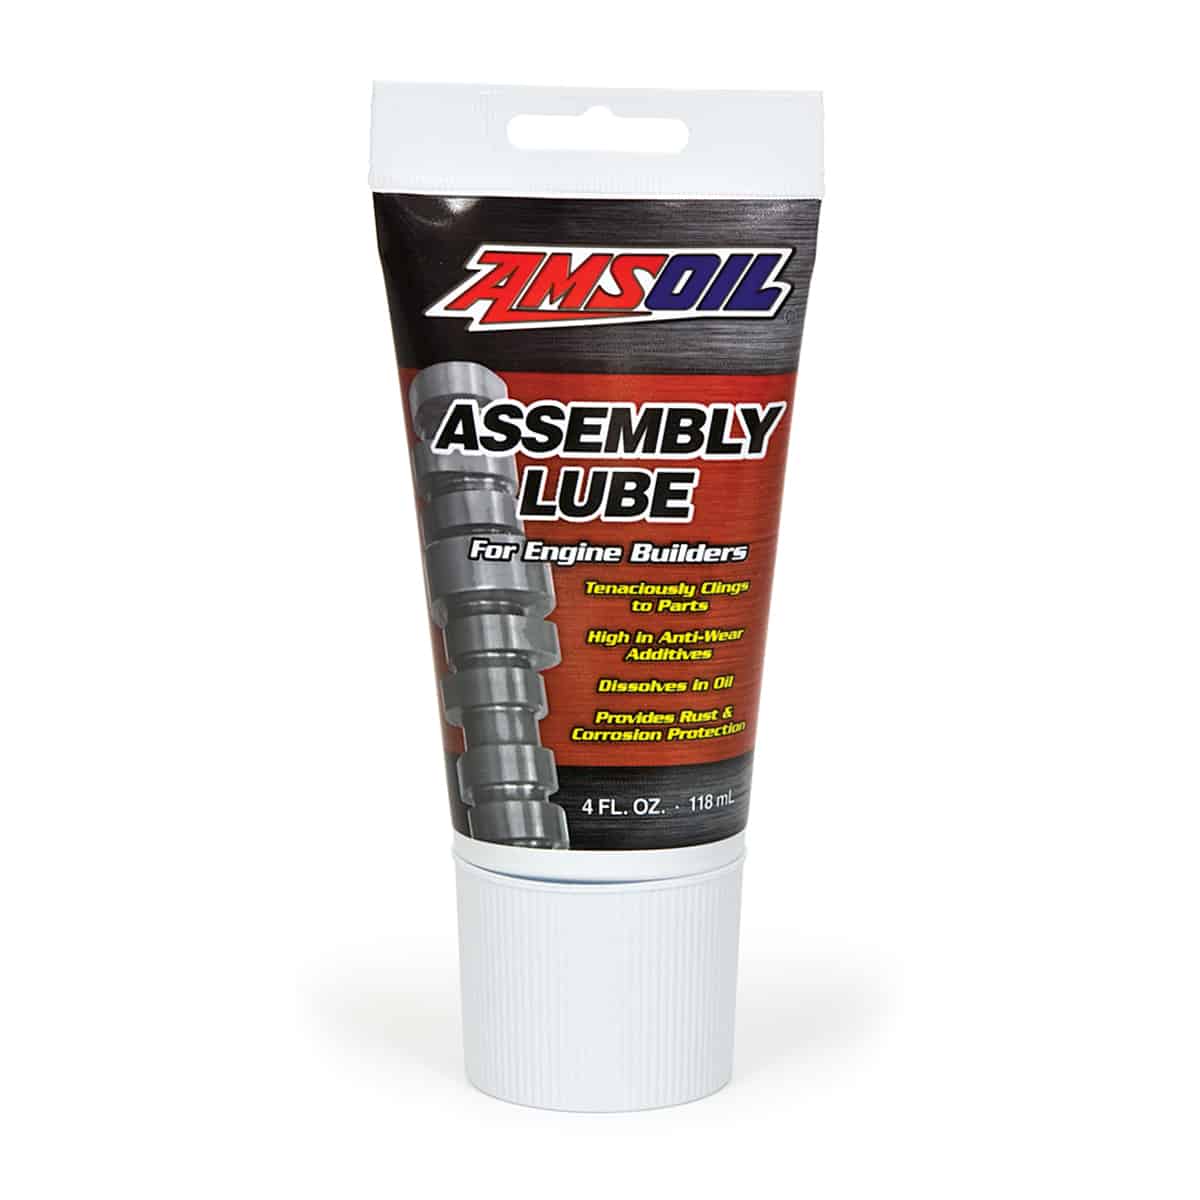 A tube of AMSOIL Engine Assembly Lube, designed to dissolve in oil, helping eliminate oil port clogging & deposit formation in four-stroke engines.